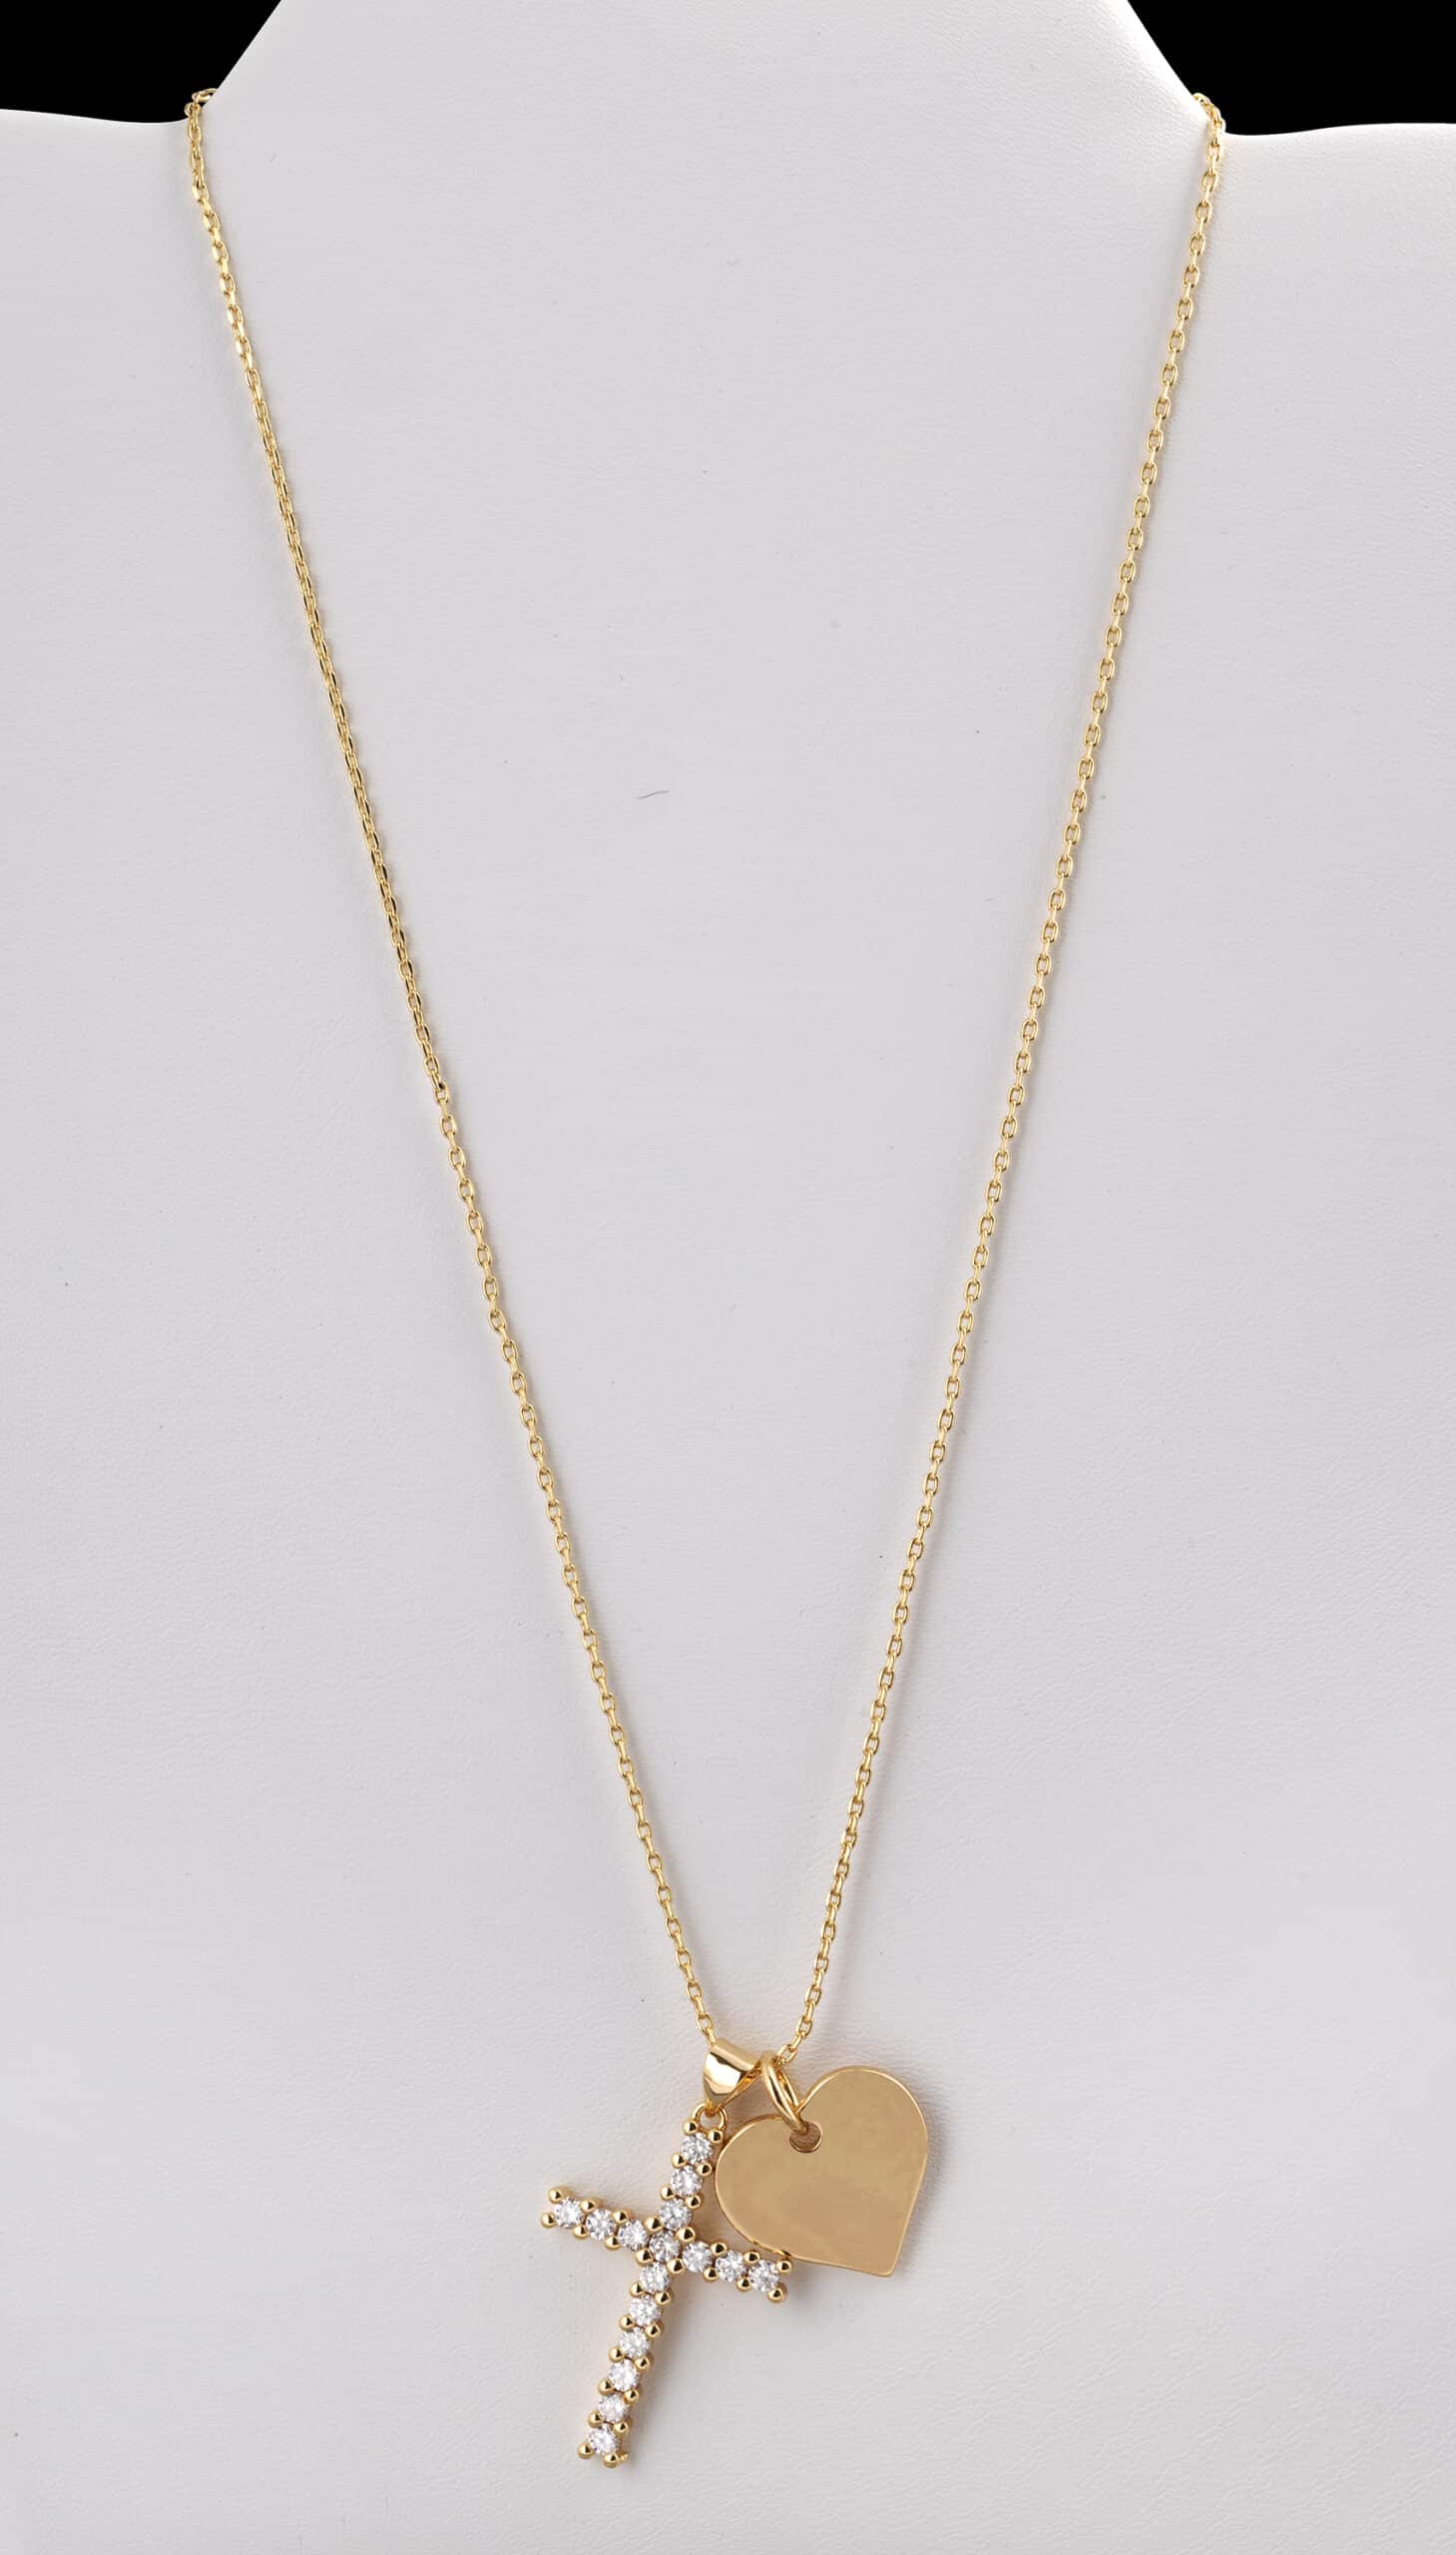 CZNK-24 | CZ Heart / Solid Heart Necklace · Goldfathers Jewelry